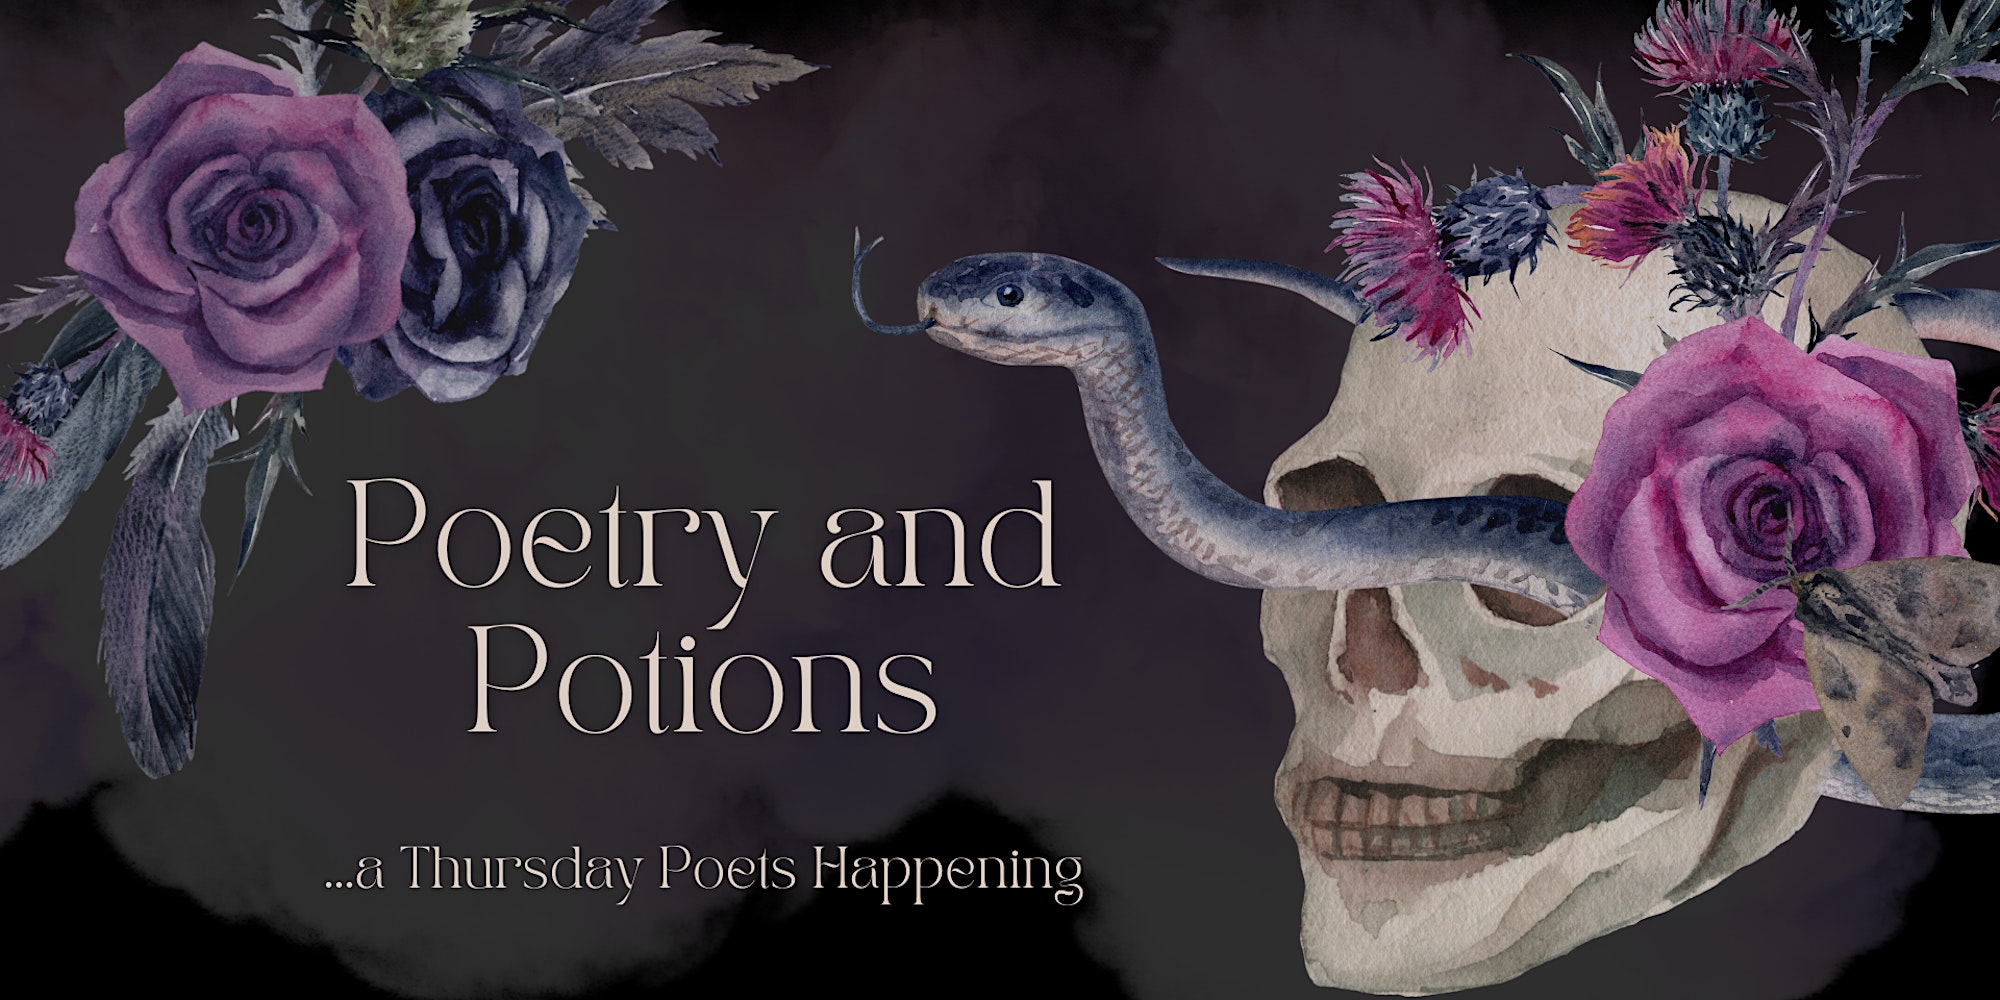 a banner depcting a snake emerging from the eye of a skeleton wearing a floral headdress. The text on the image reads "poety and potions...a thursday poets happening"